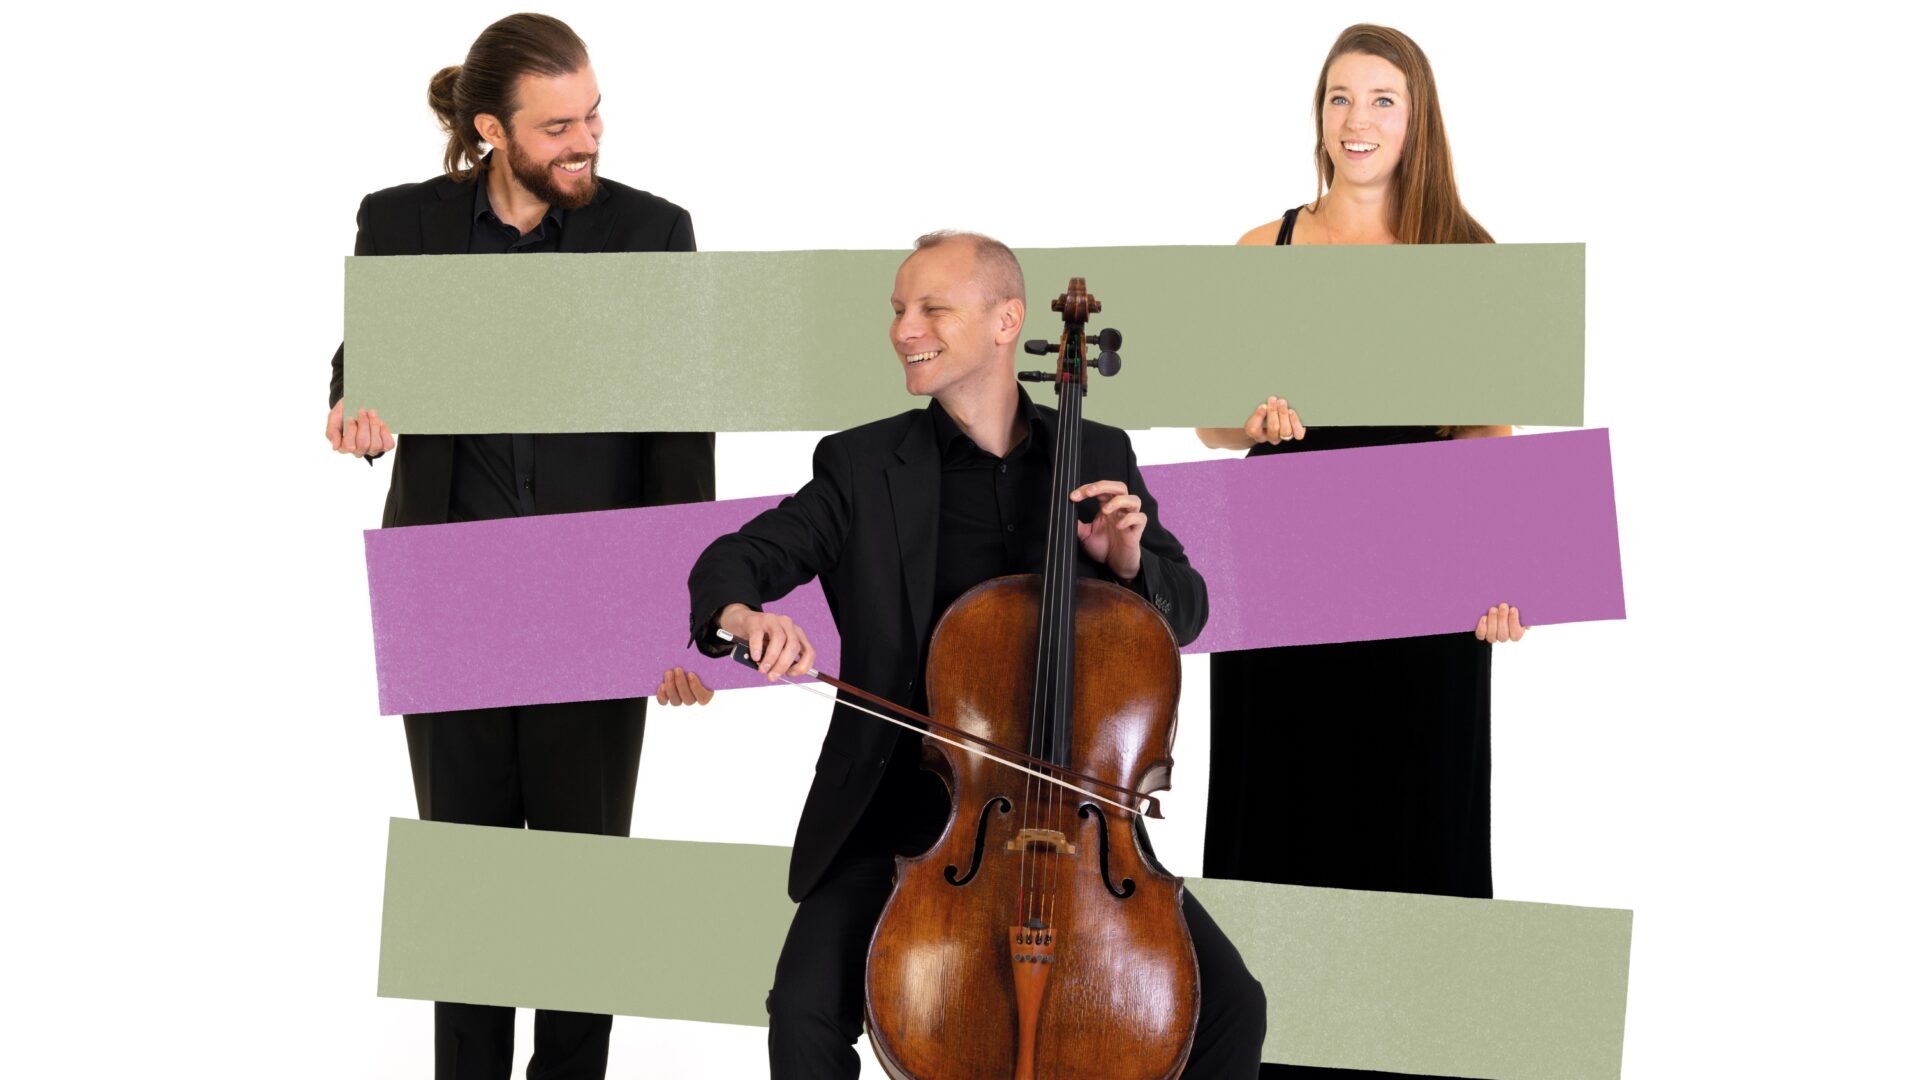 Three BSO Musicians, one playing the cello